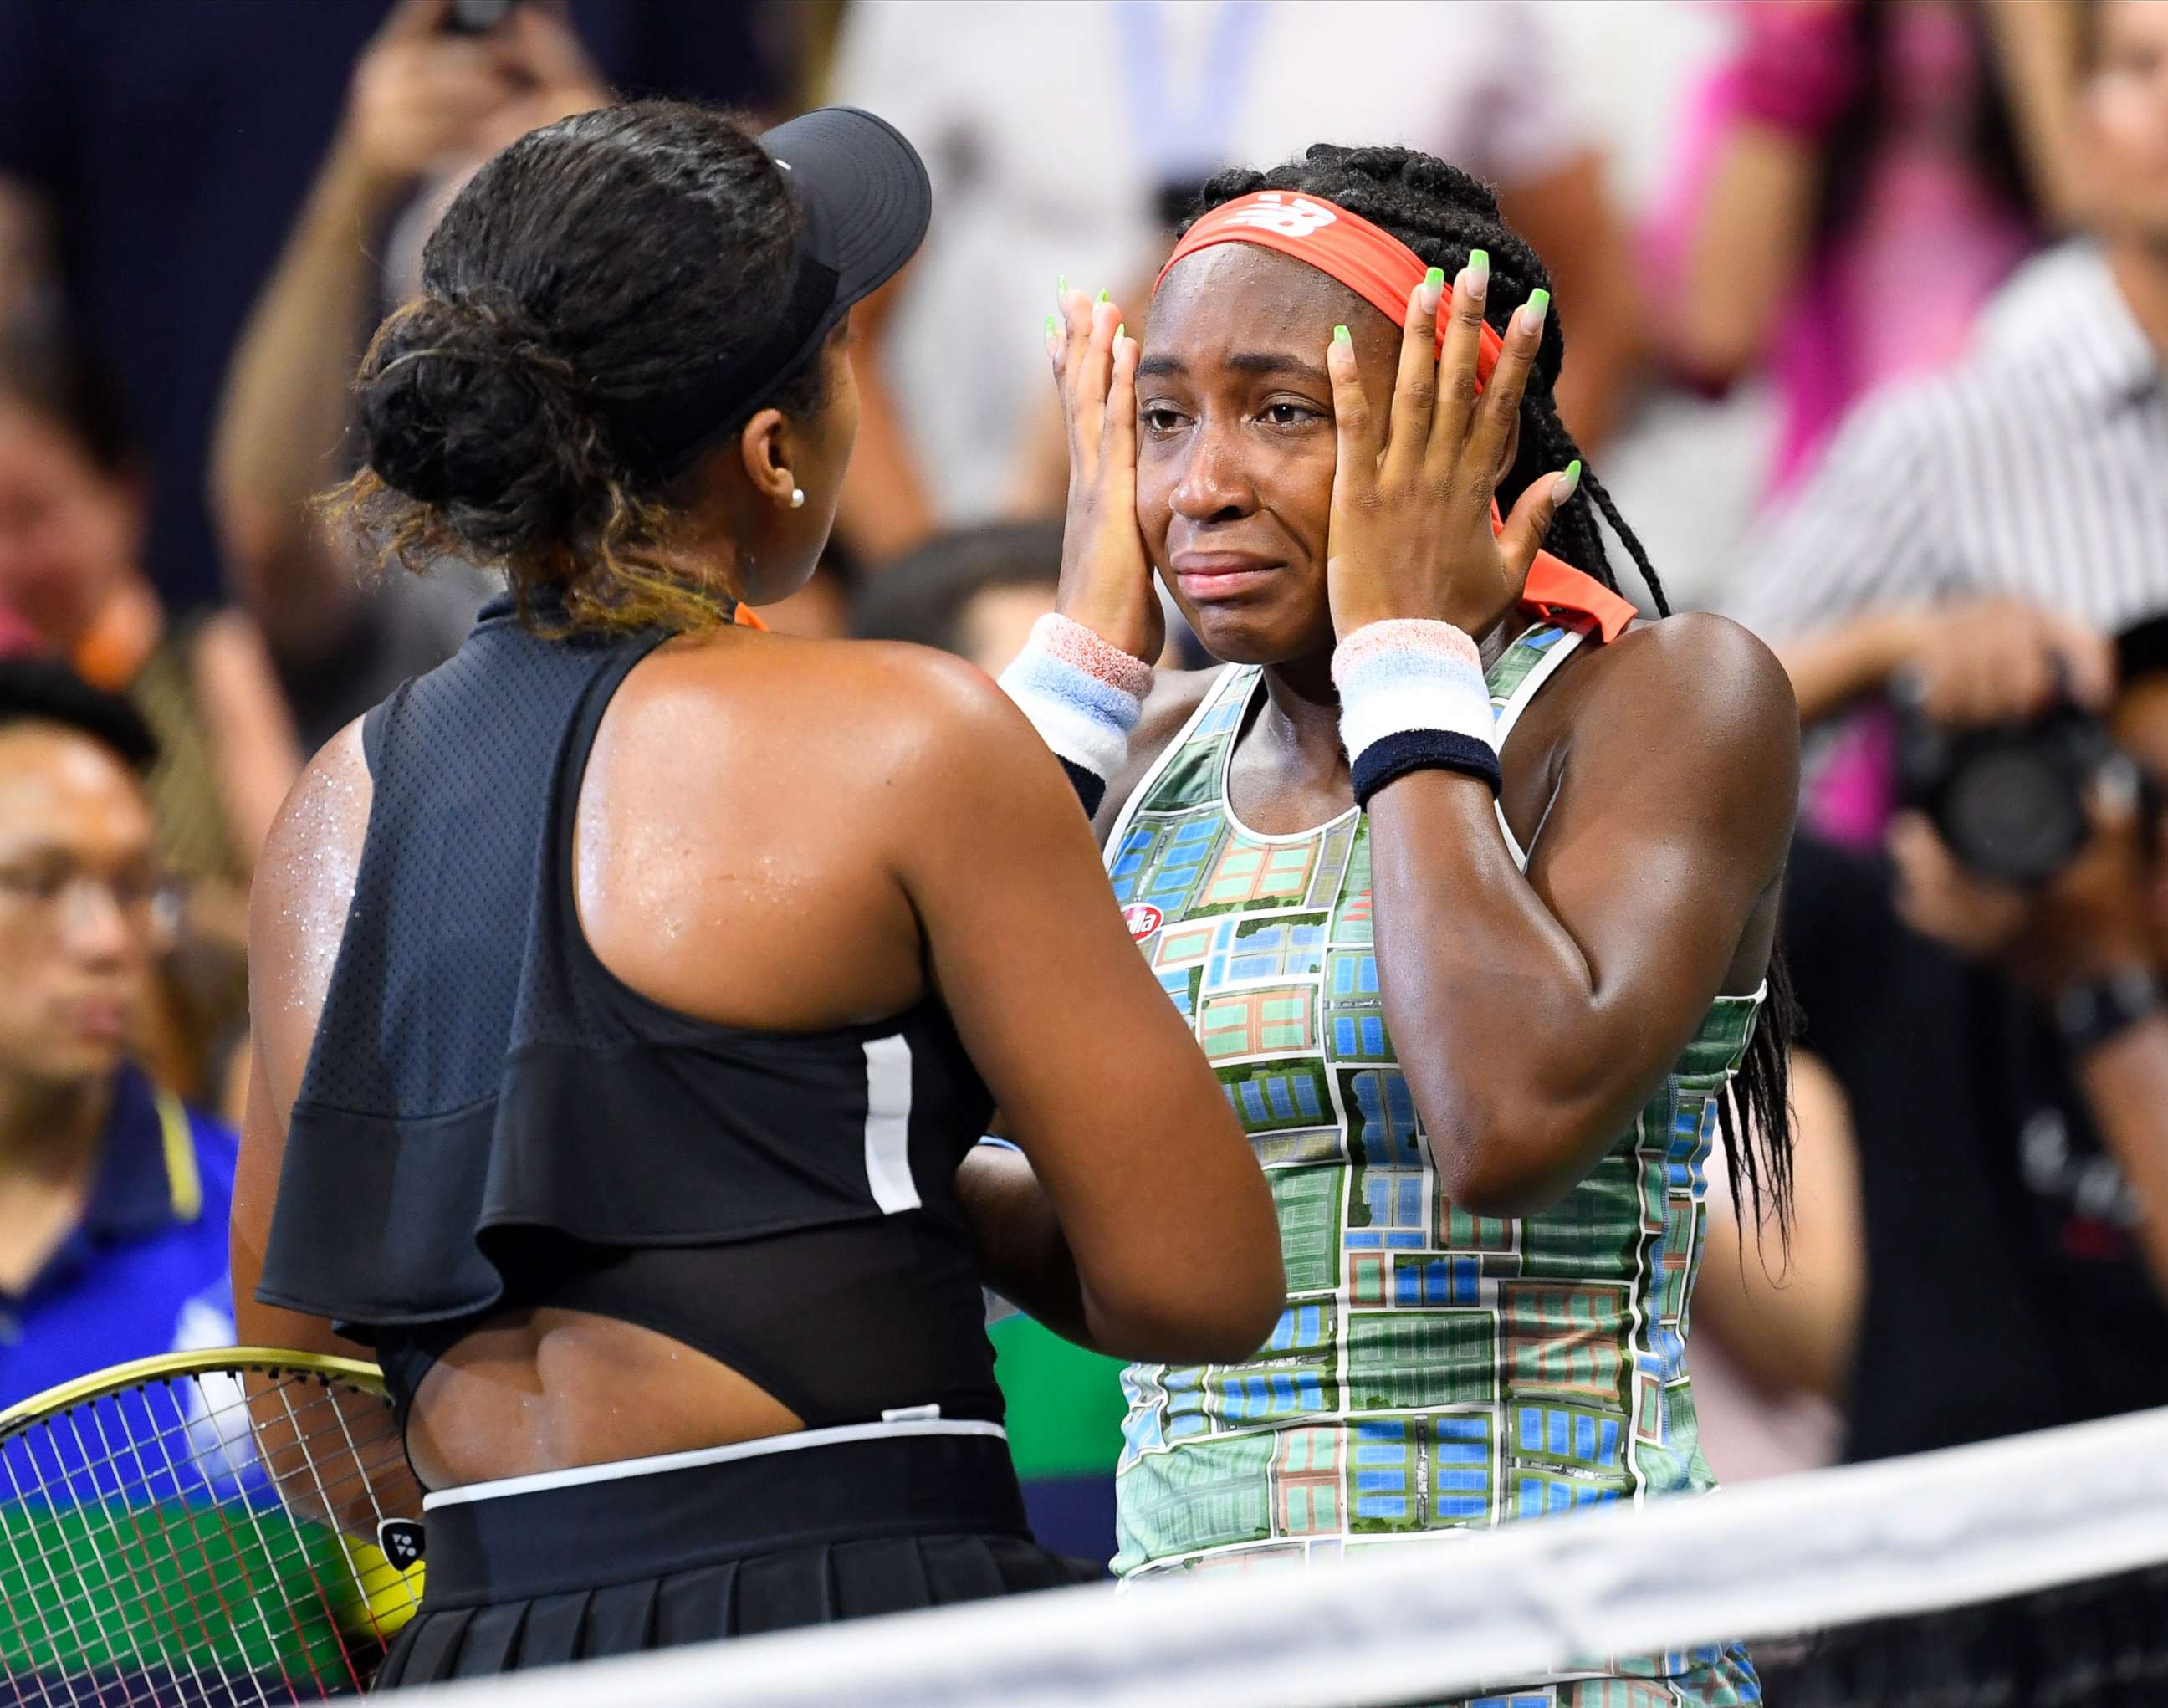 Coco Gauff defeated by Naomi Osaka in emotional 3rd round match at US Open  - ABC News